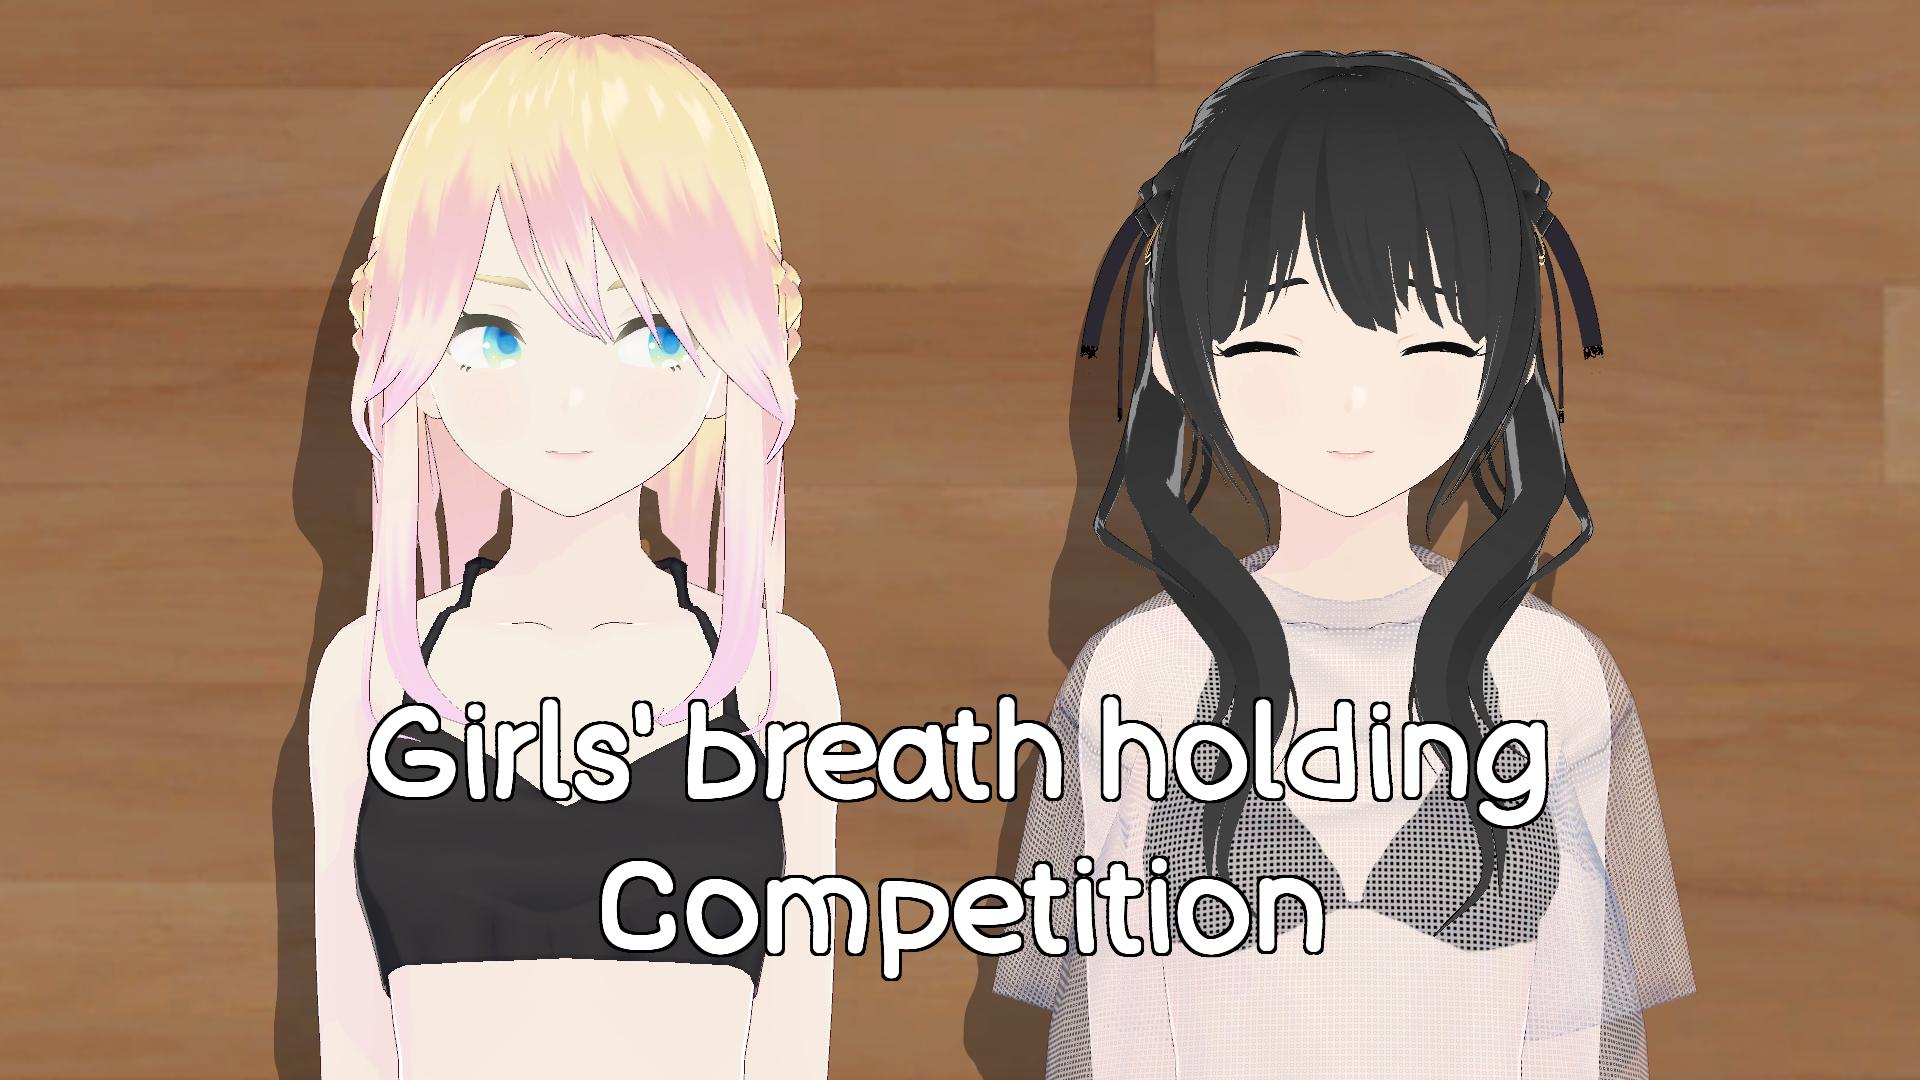 Girls' breath holding competition